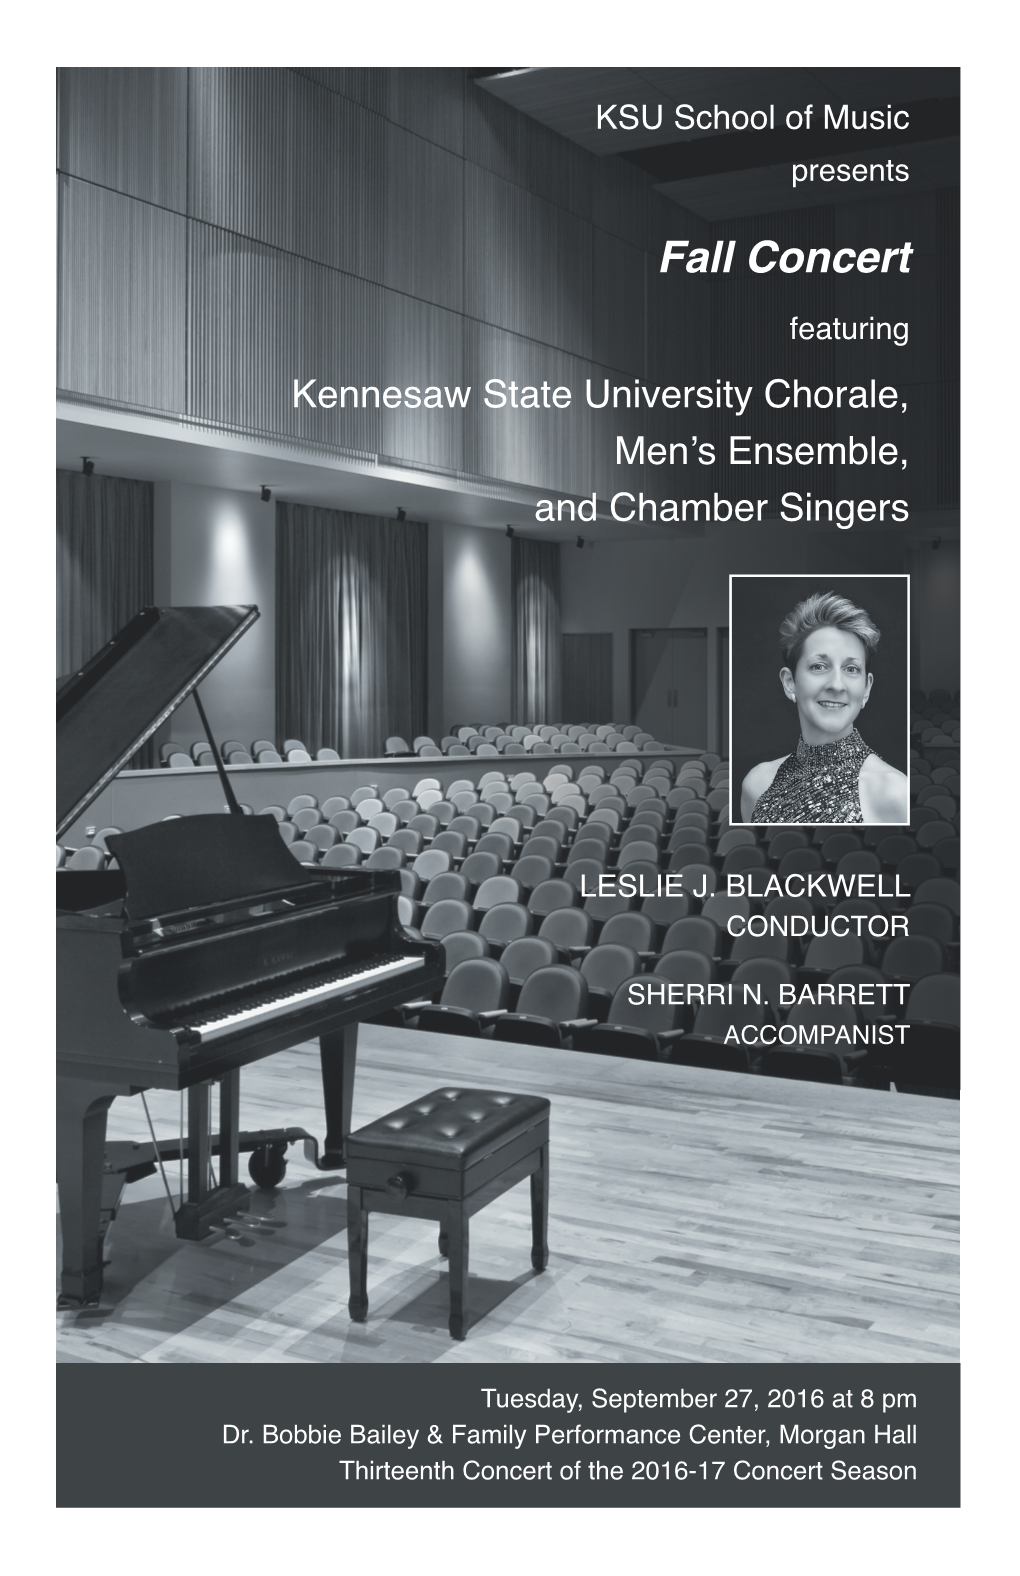 Fall Concert Featuring KSU Chorale, Men's Ensemble and Chamber